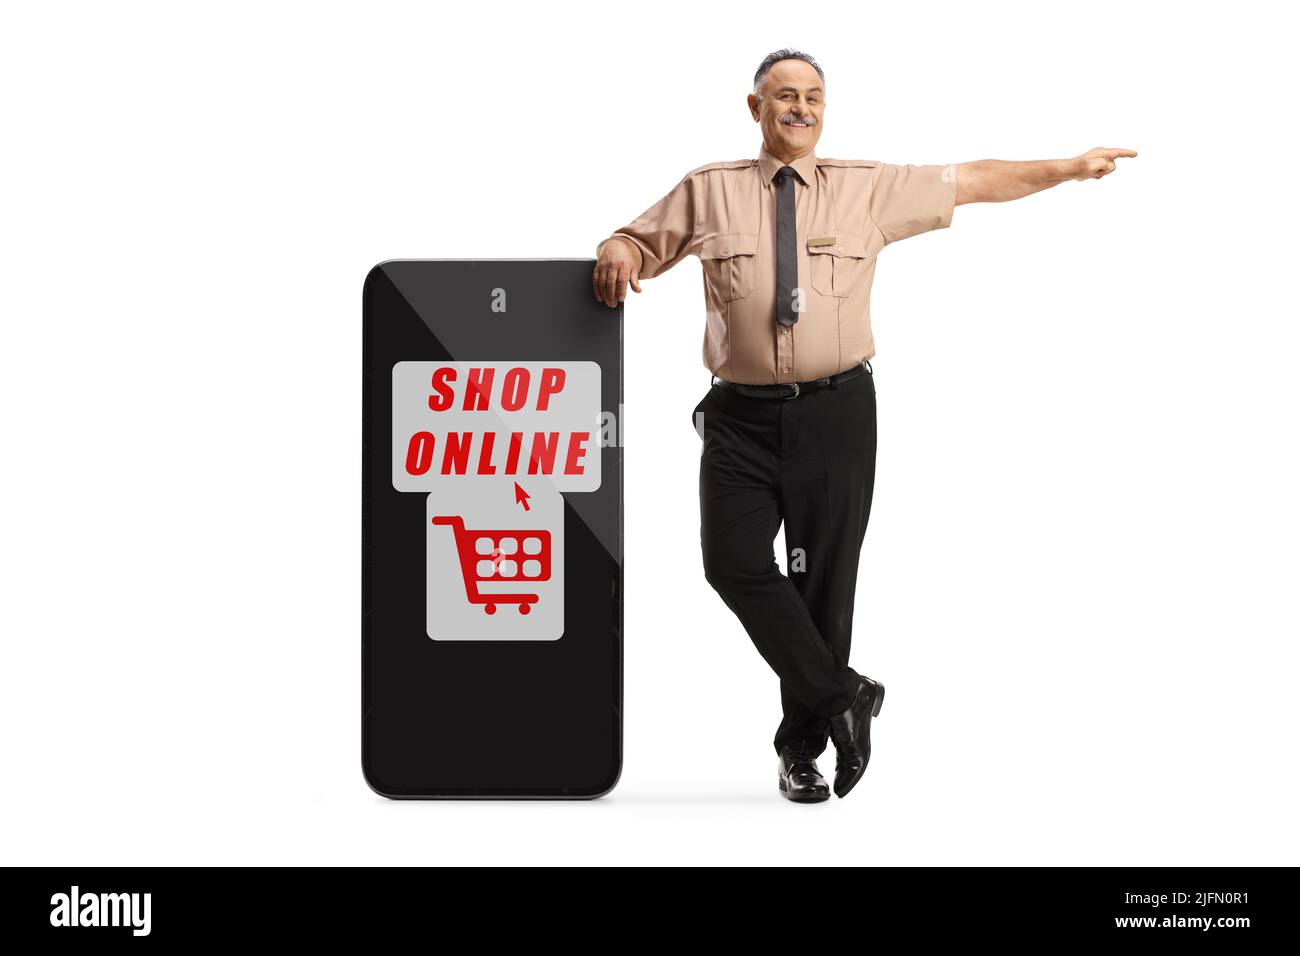 Security guard leaning on a smartphone with text shop online and pointing to the side isolated on white background Stock Photo